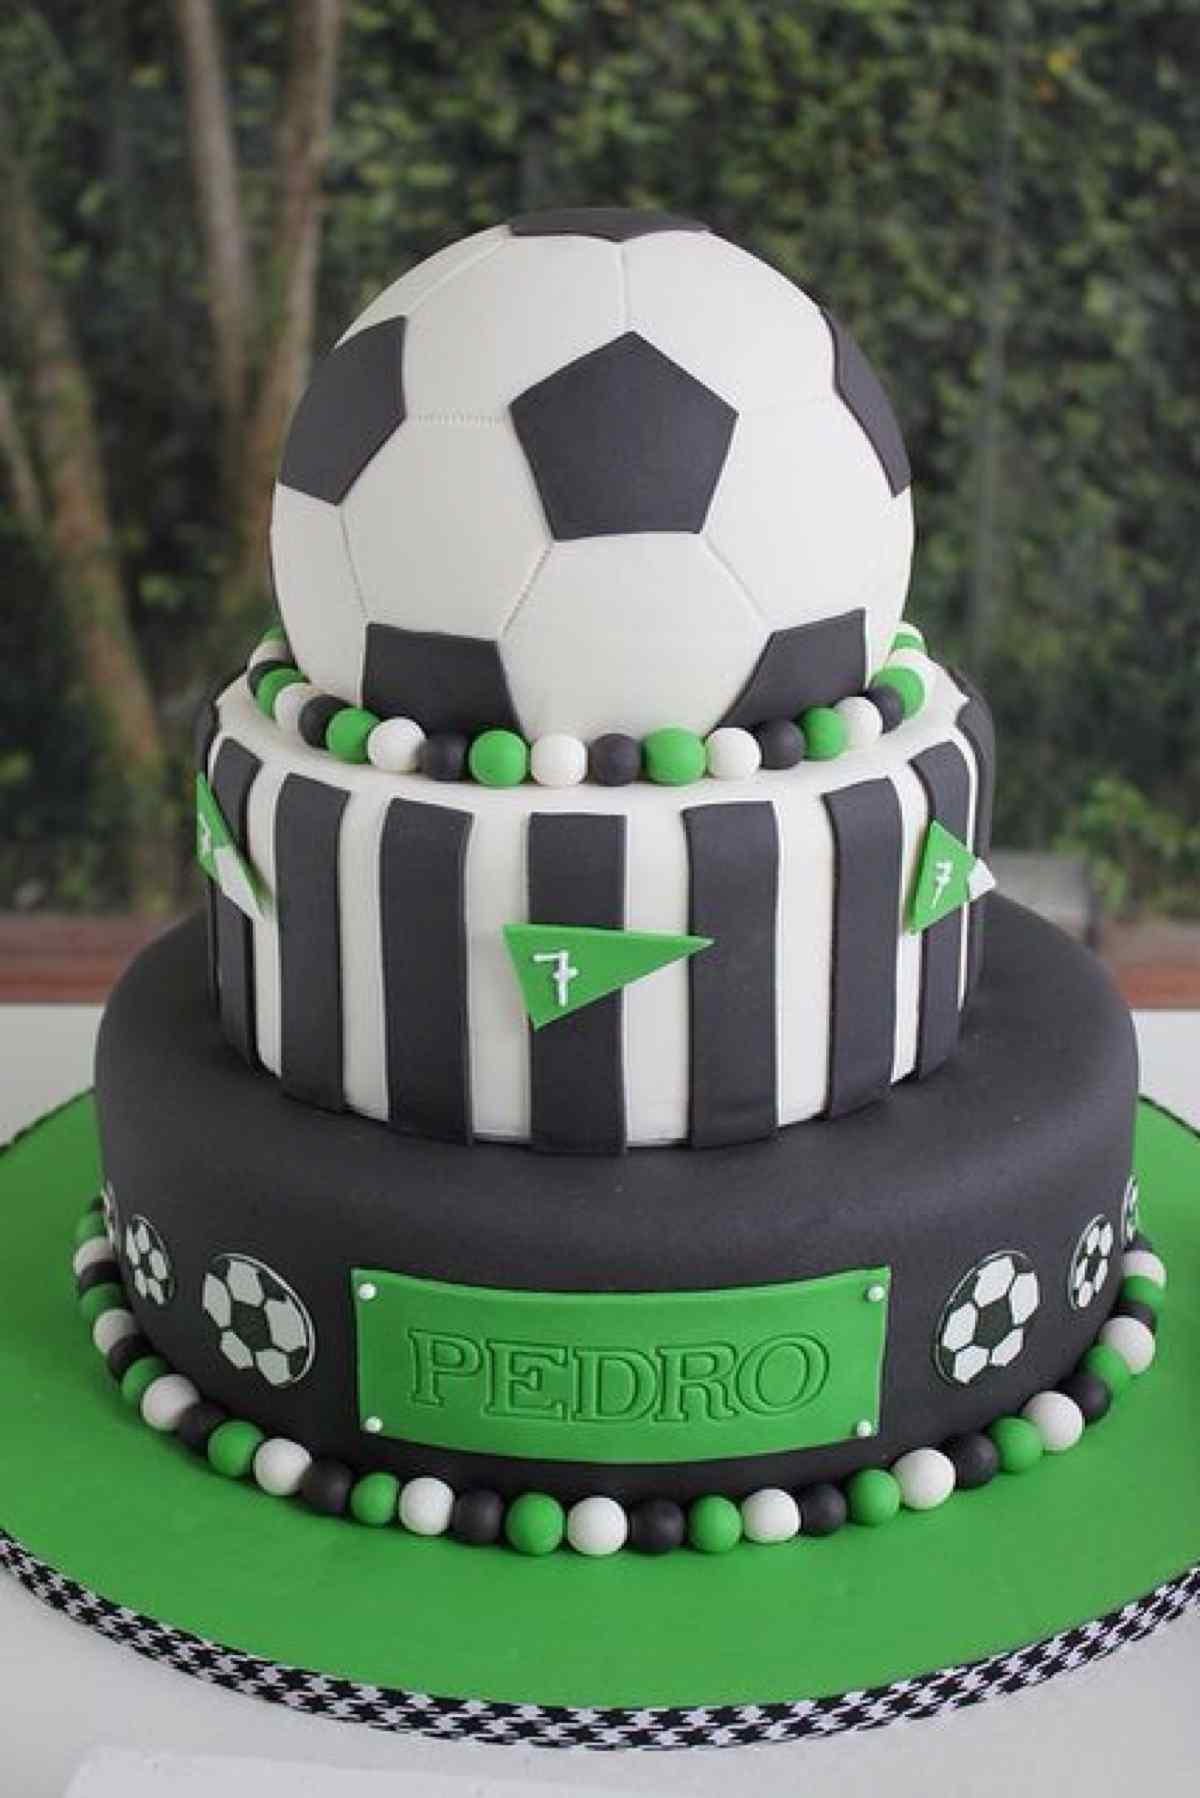 Two tier soccer field cake 双层足球场蛋糕 - Cube Bakery & Cafe